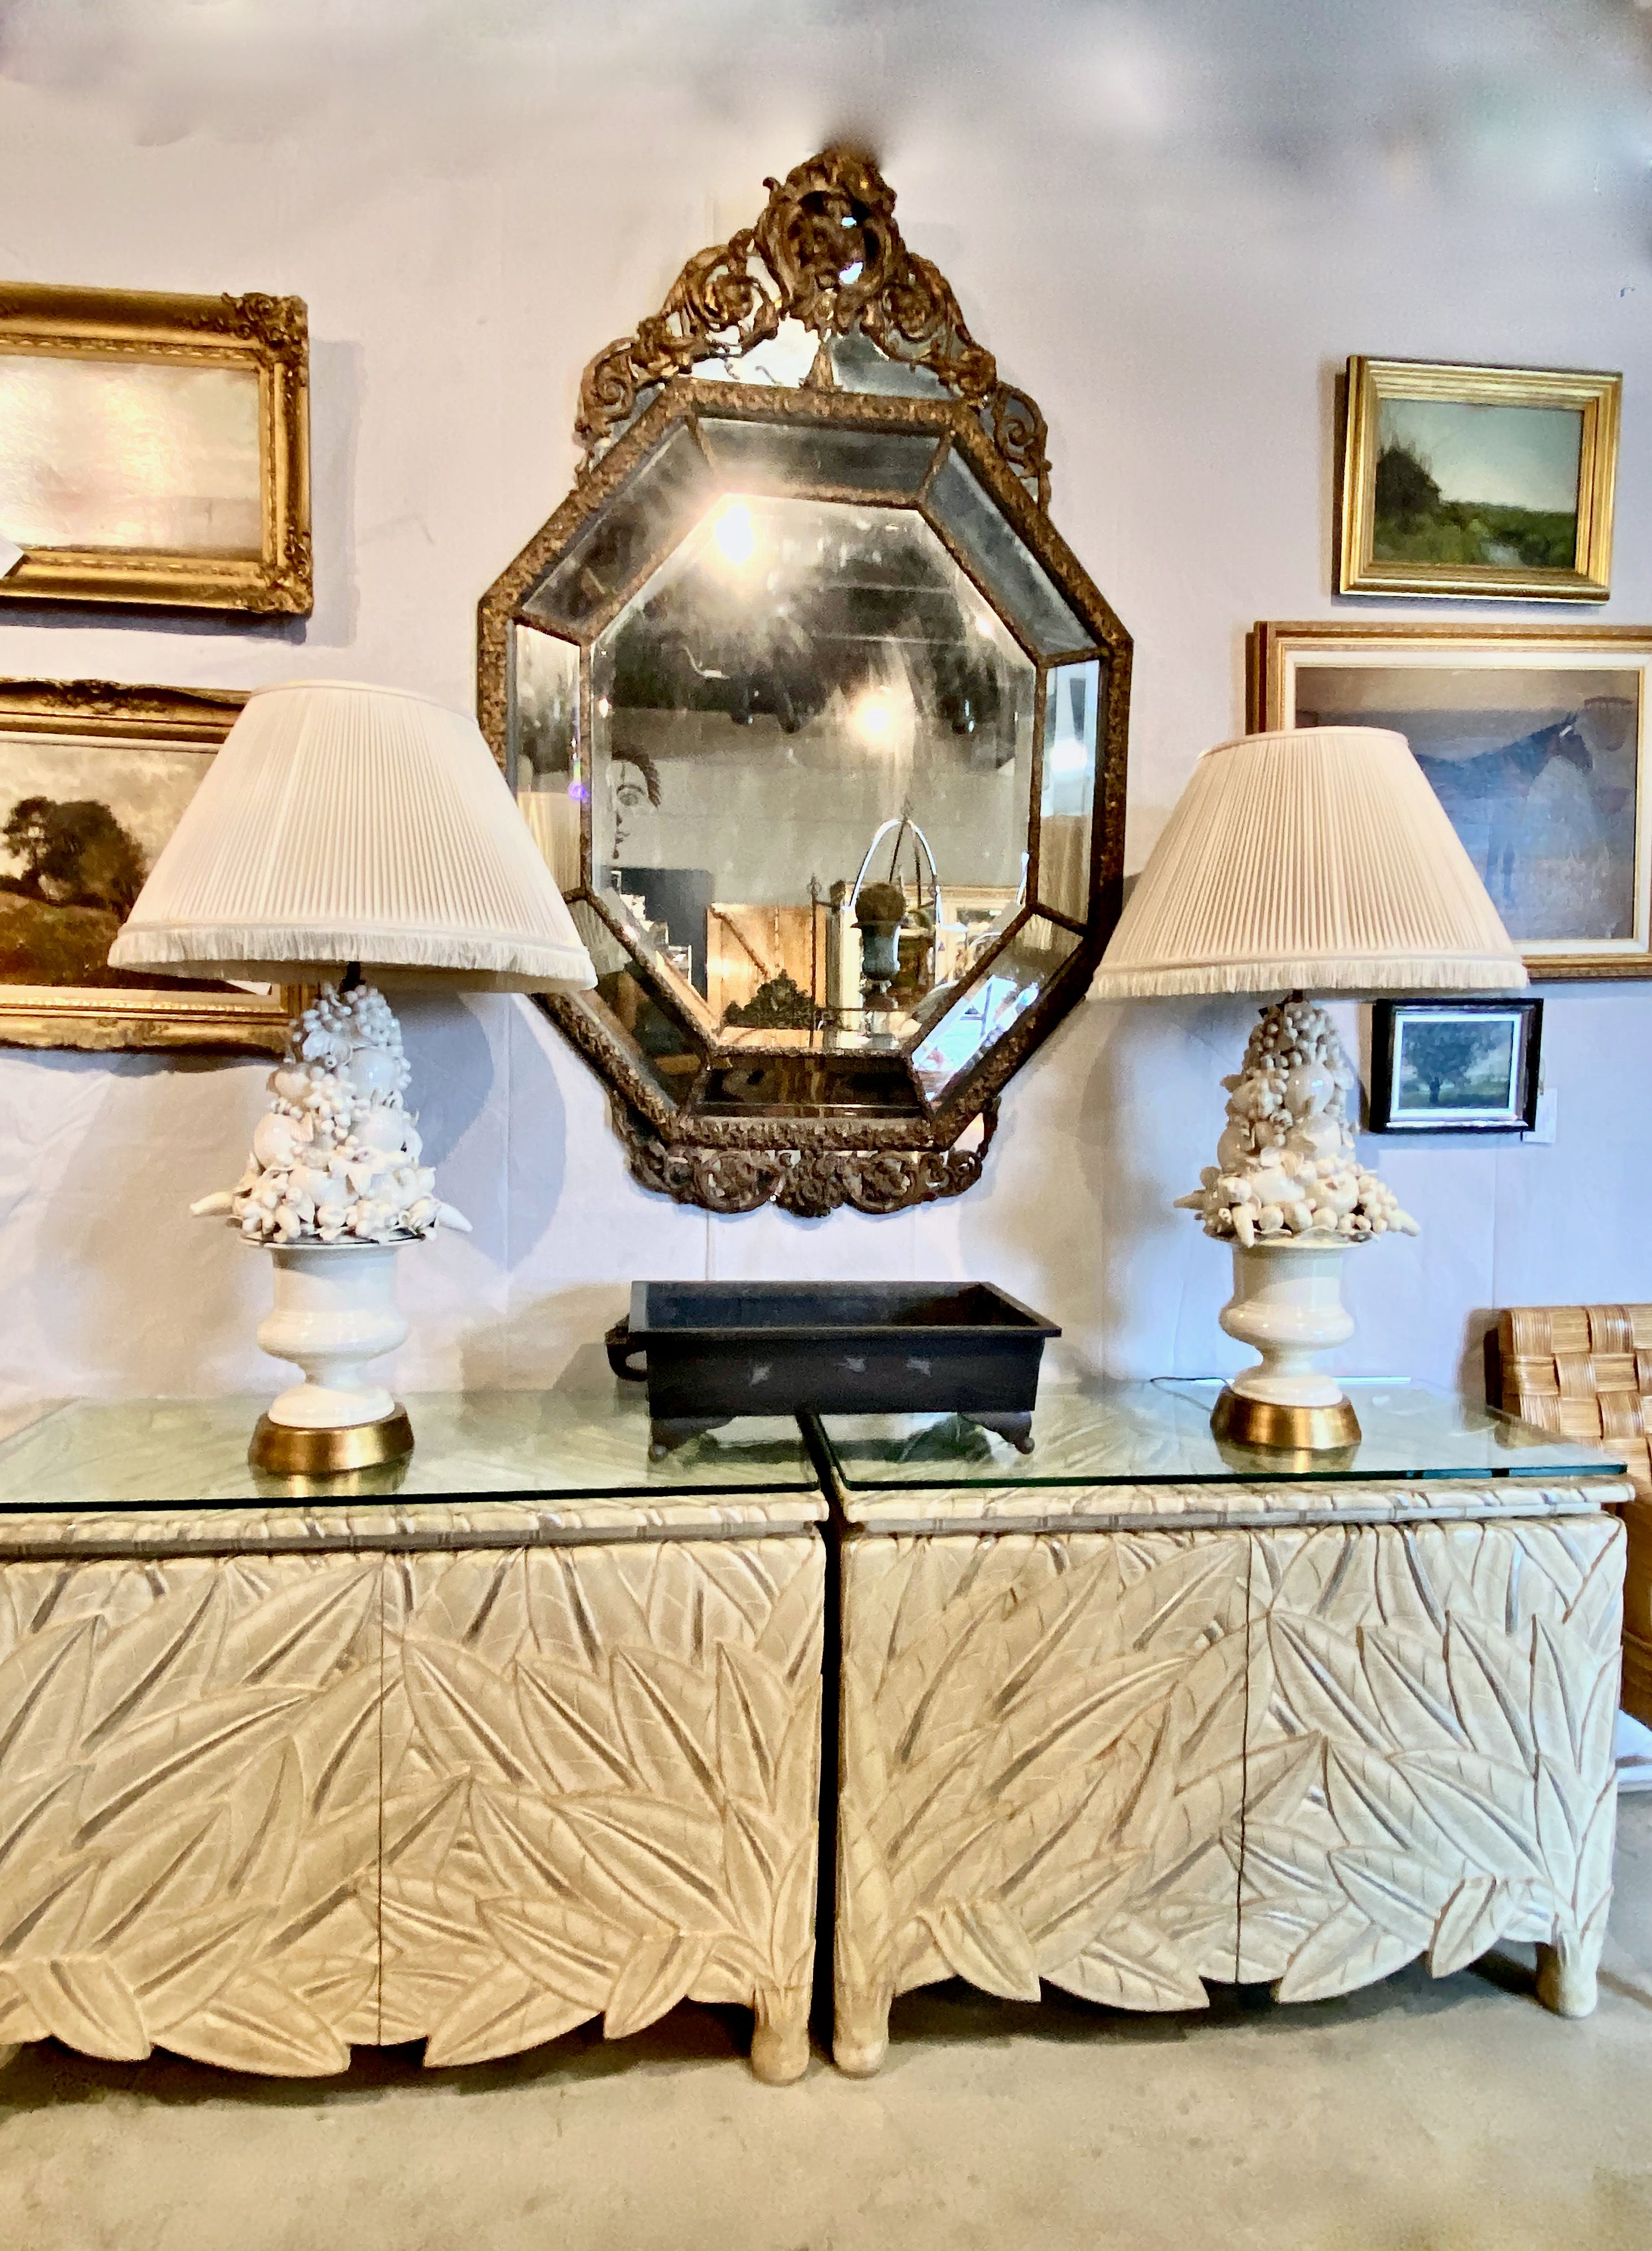 Both cabinets are in very good to excellent original condition. We acquired them from a well-known Beverly Hills estate that was decorated by Paul Ferrante in the early 1960's. The house was decorated with multiple mid-century master designer pieces